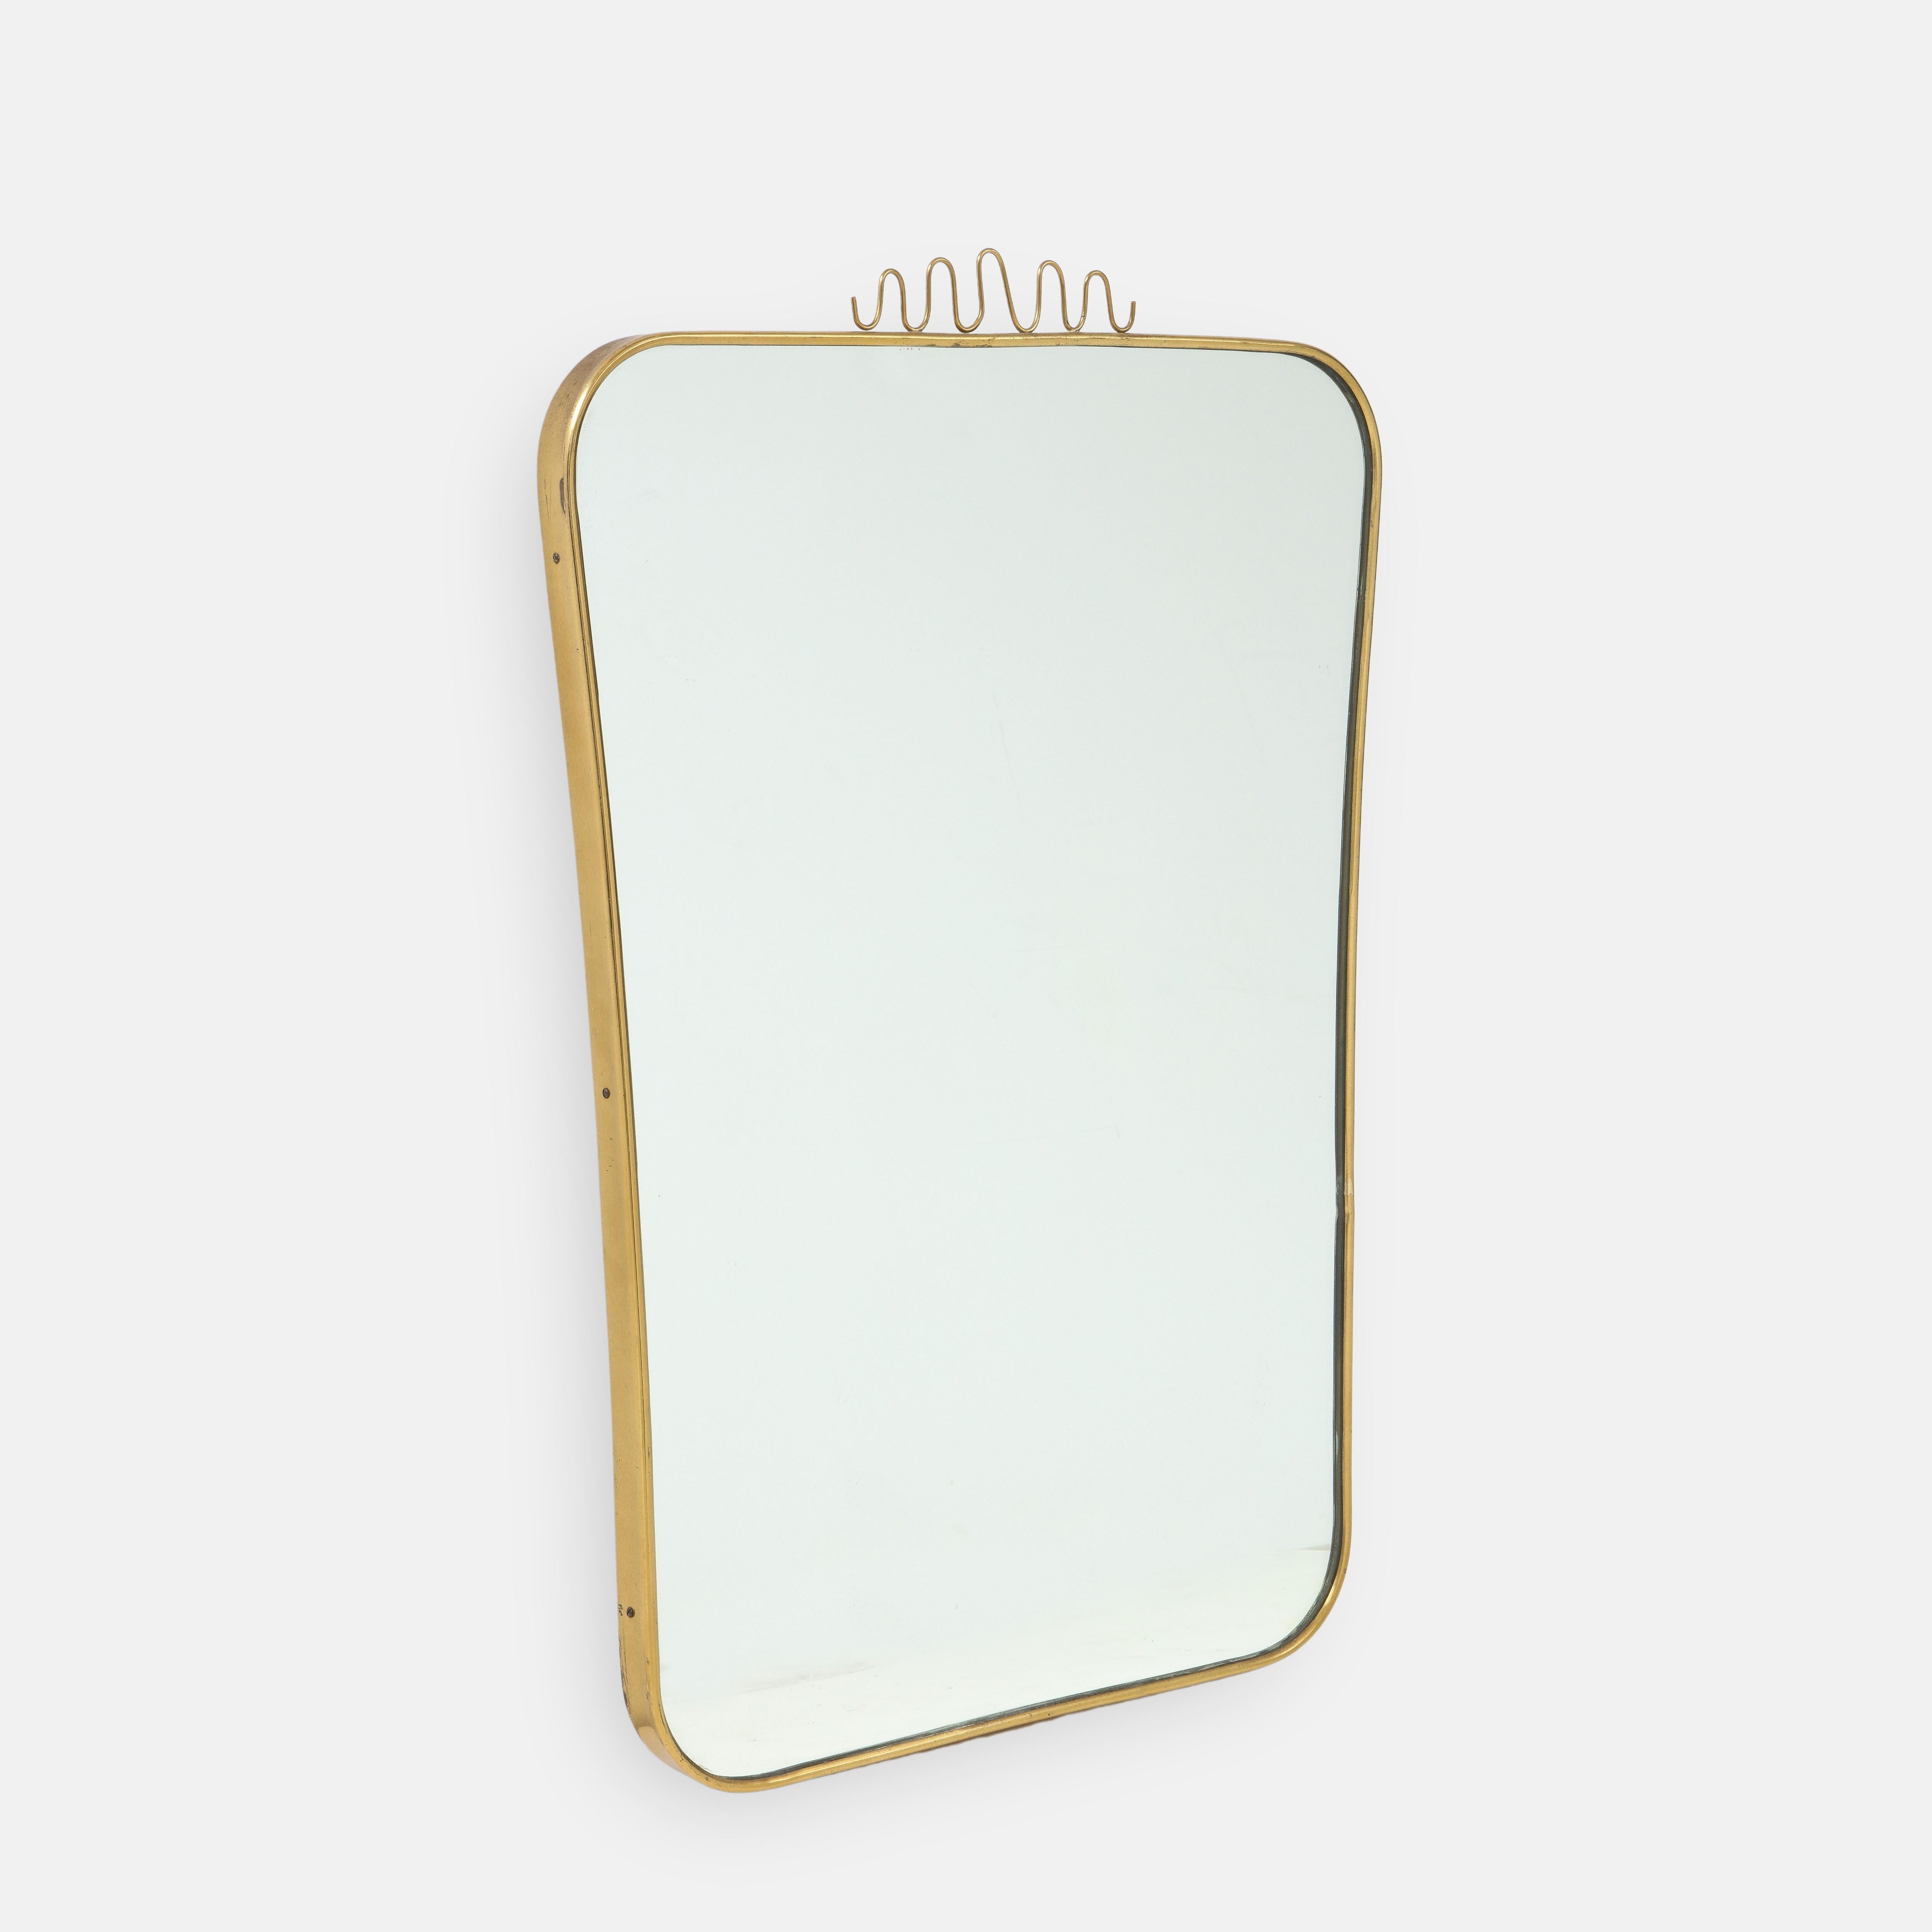 Elegant modernist shaped brass wall mirror with lovely decorative brass element on central top, Italy, 1960s. This charming midcentury mirror illustrates in its playful decoration the Italian Novecento design characteristic of this period. The